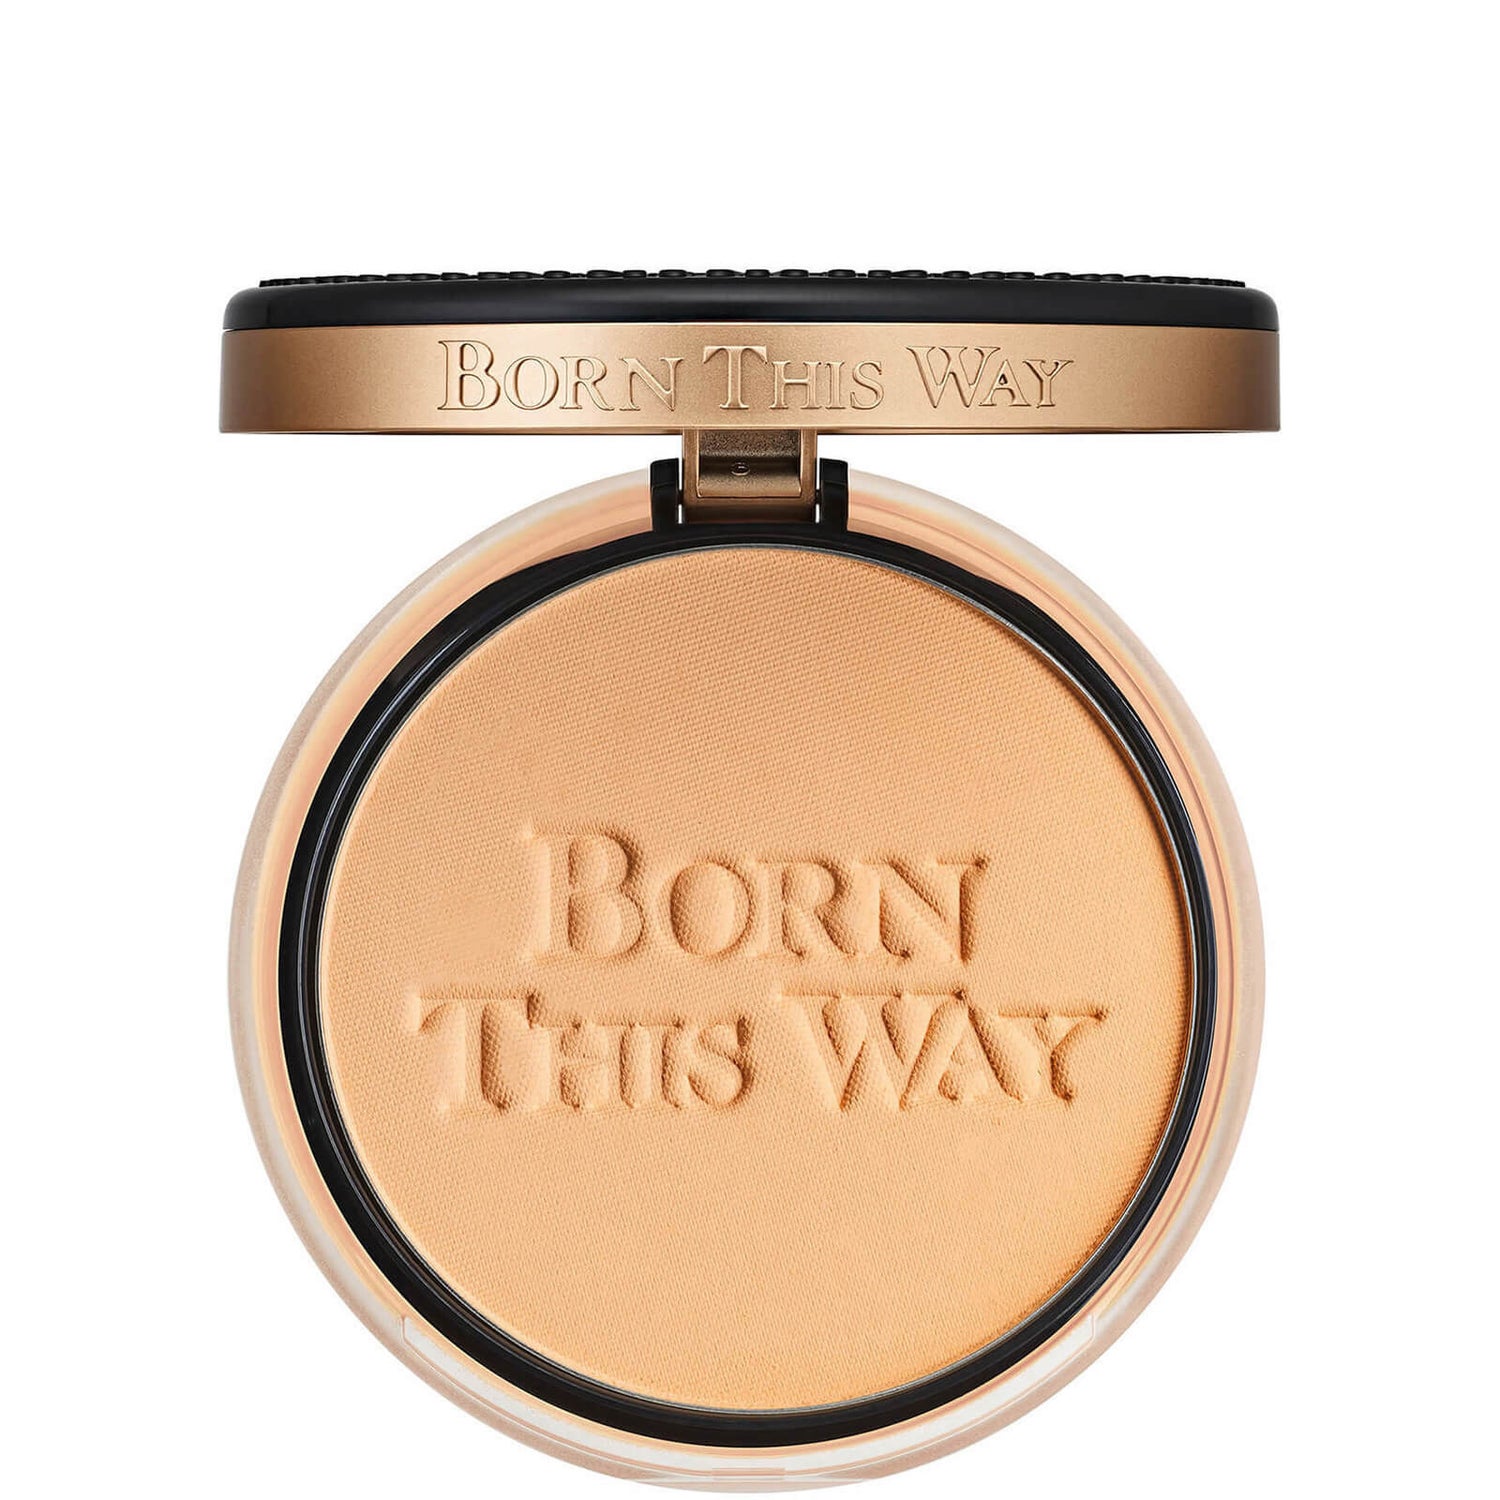 Too Faced Born This Way Multi-Use Complexion Powder (Various Shades)